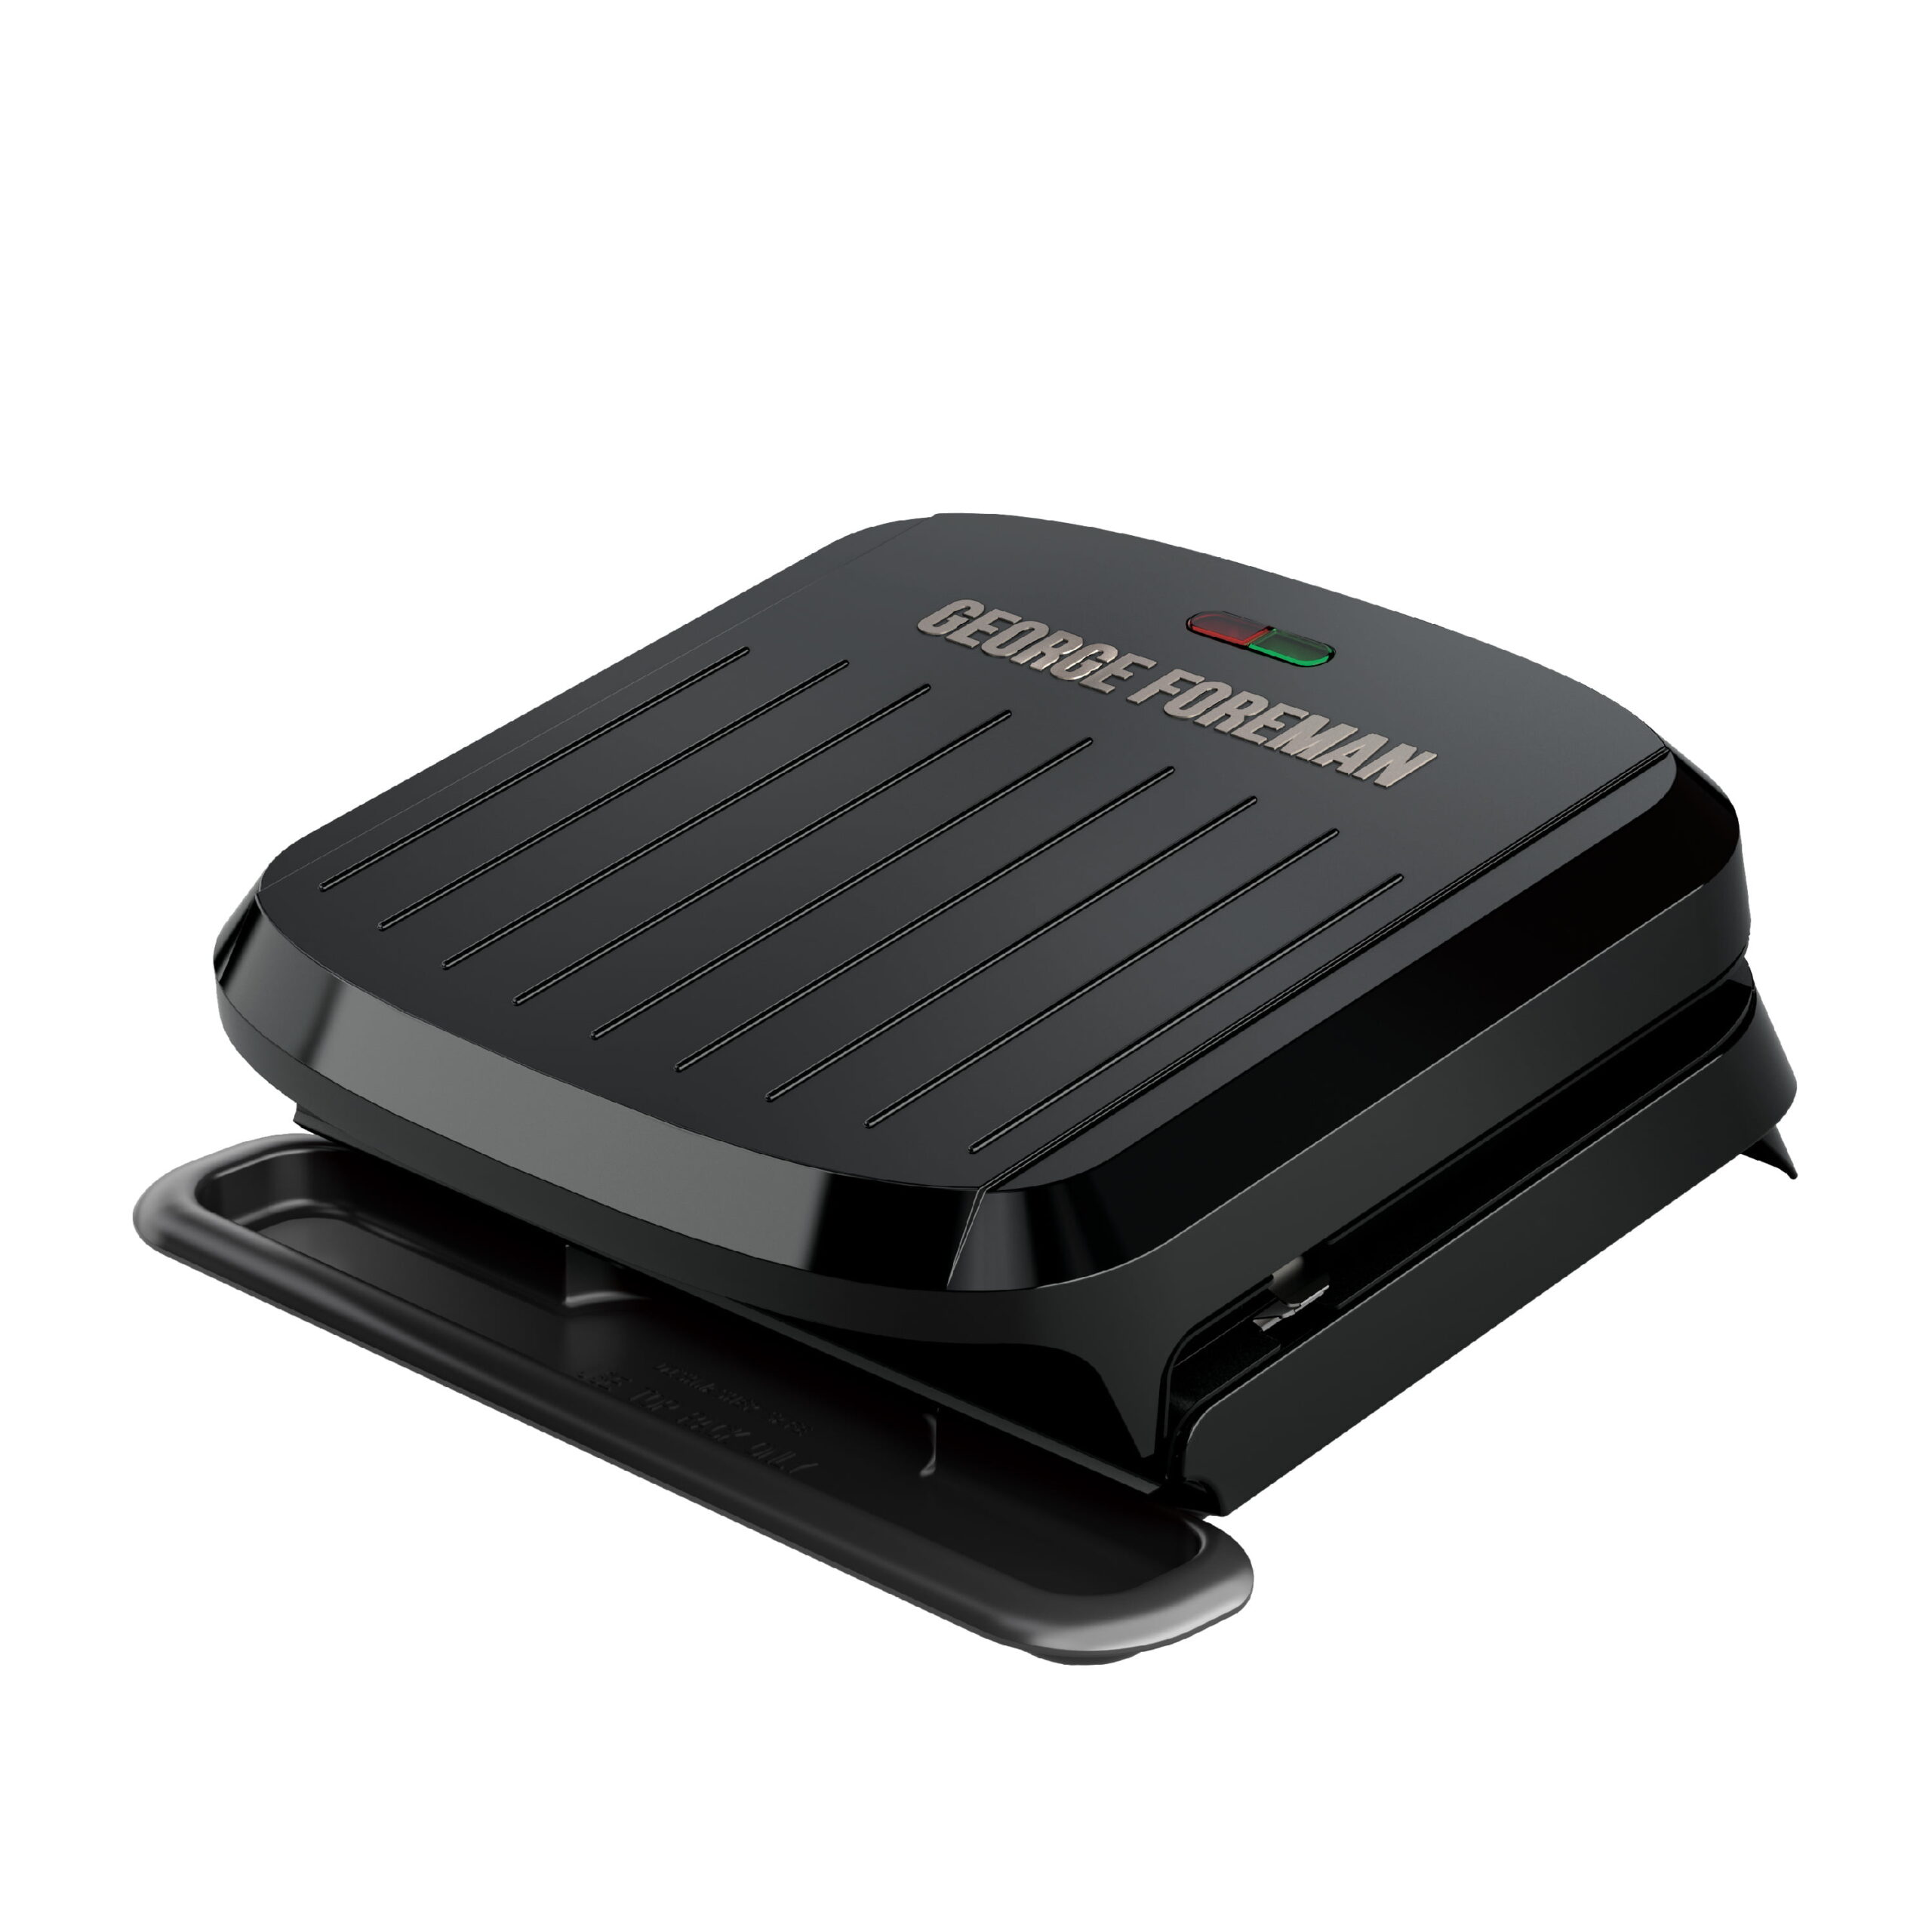 Large George Foreman Grill BBQ - REMOVABLE Plates - appliances